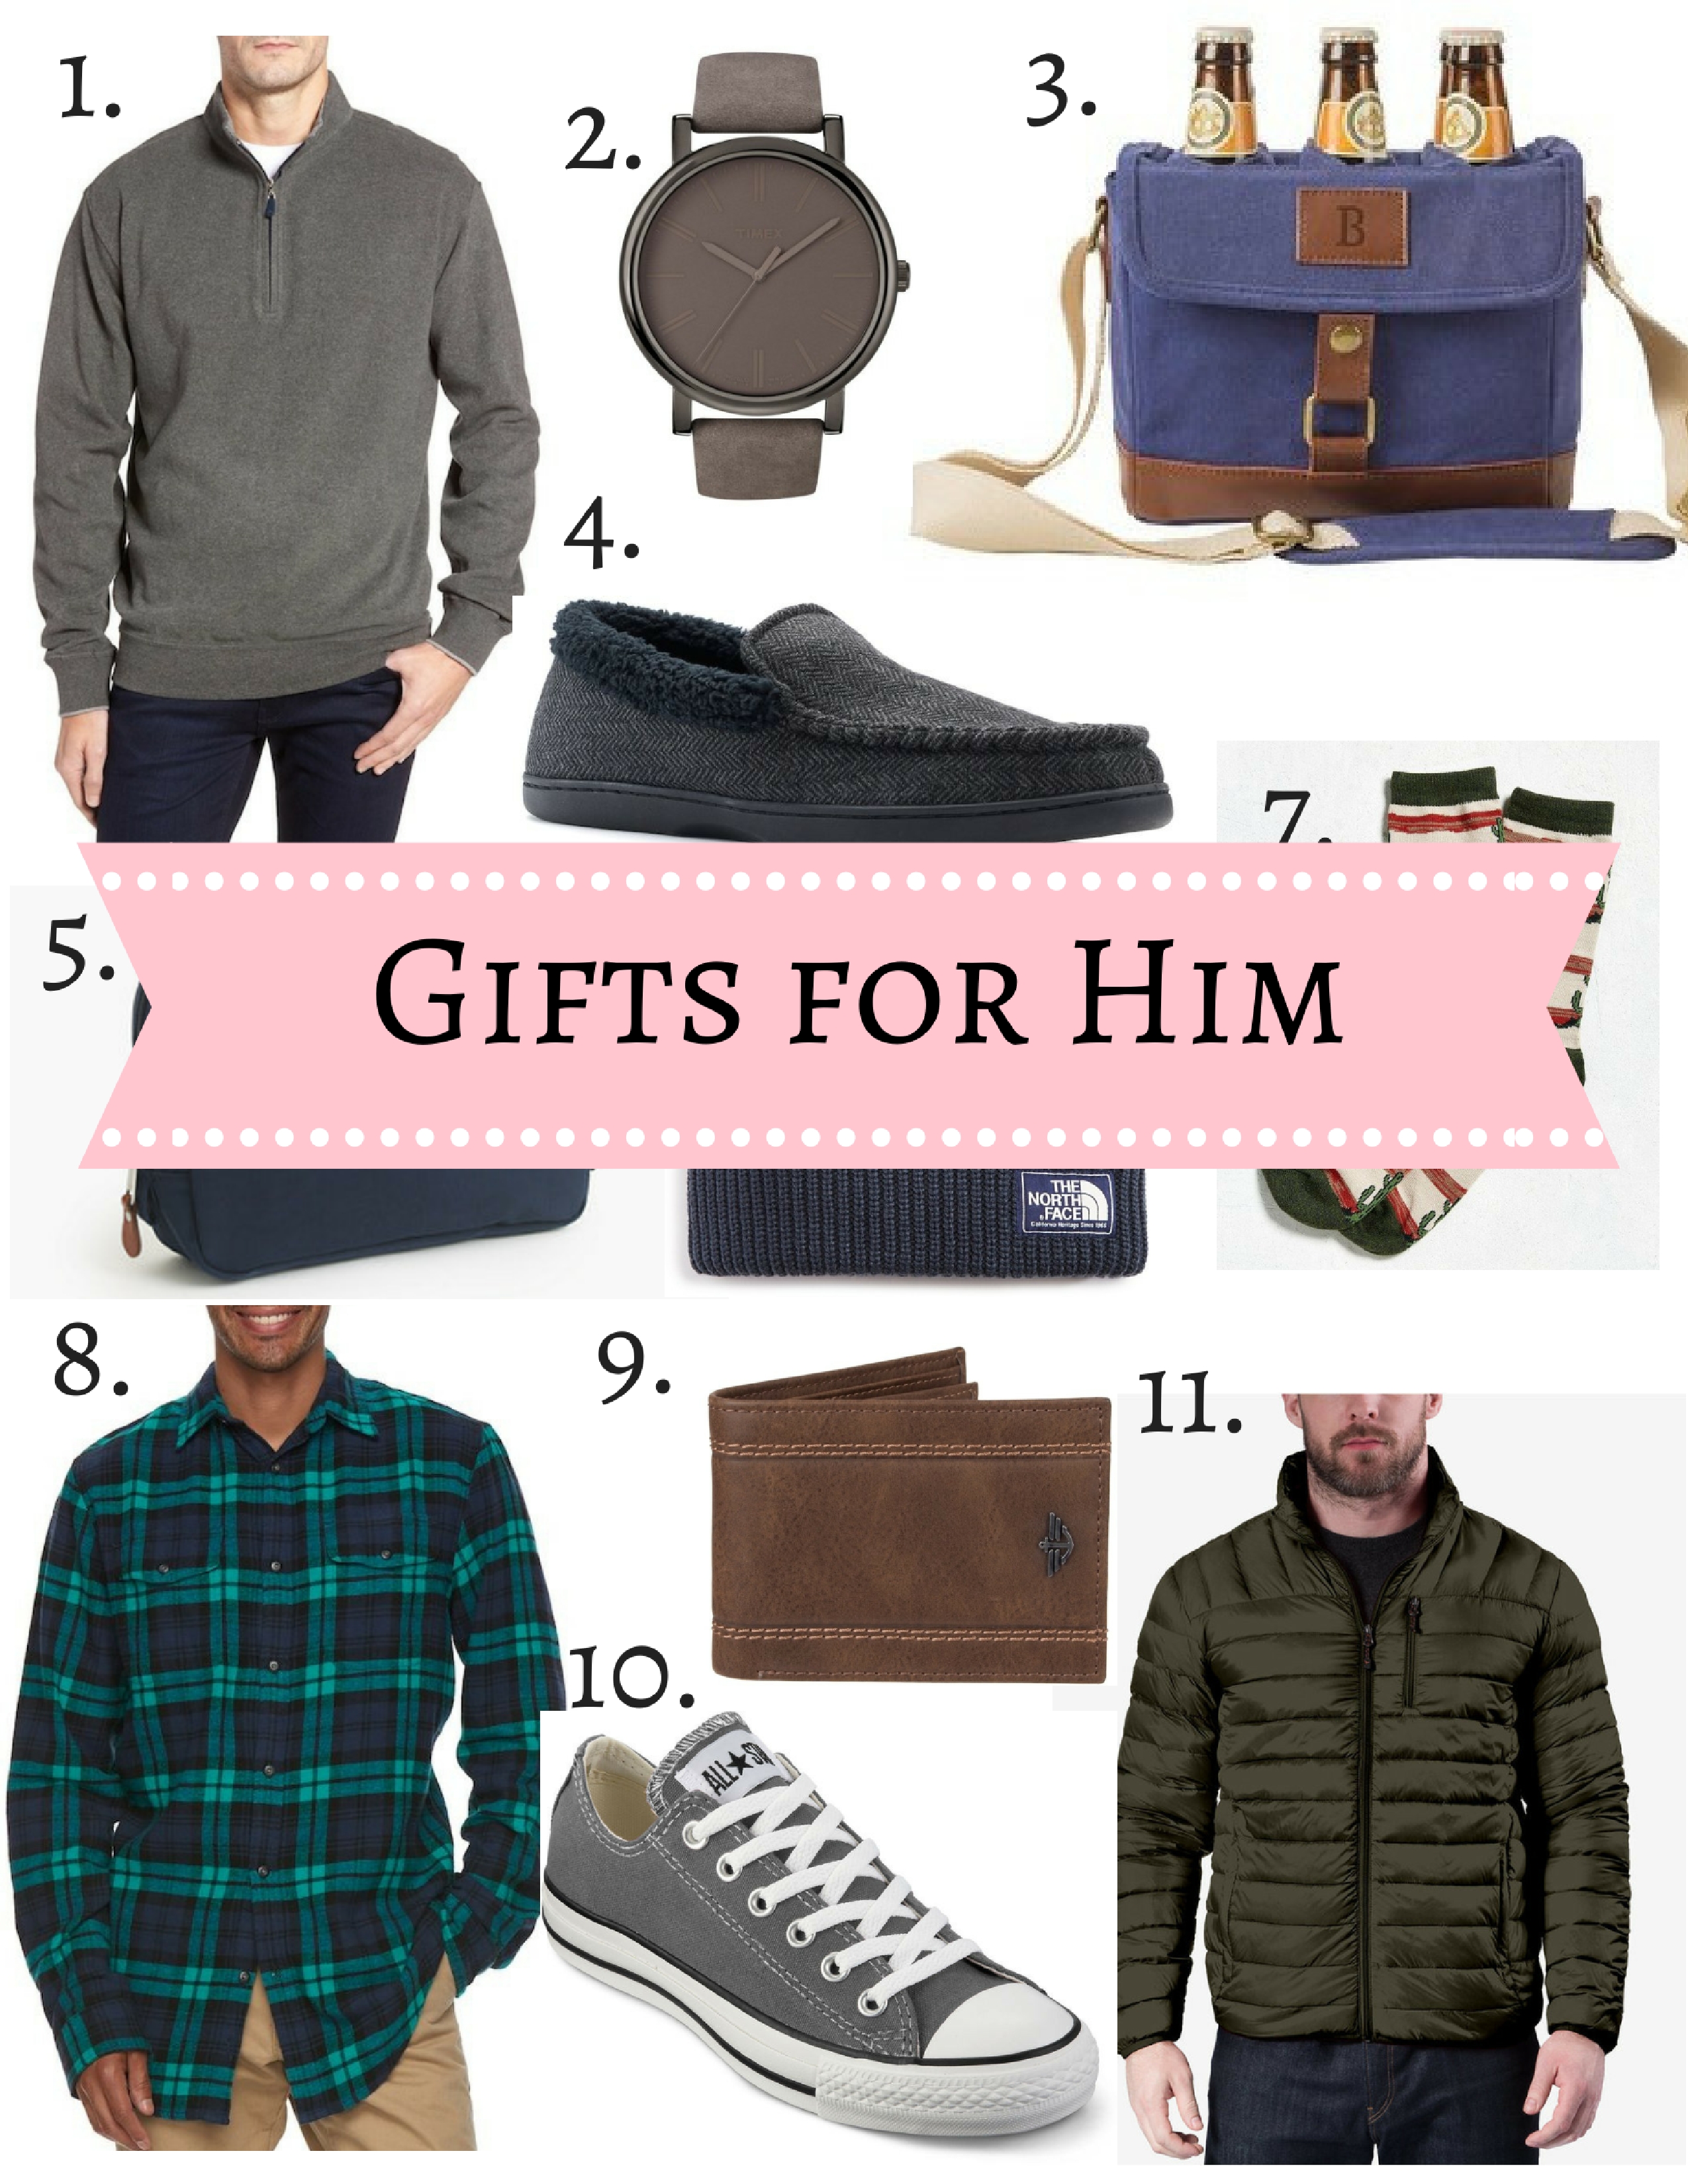 Men's Gift Ideas: Gift Guide for Him (Dad, Brother, Boyfriend, Friend, Family Member)